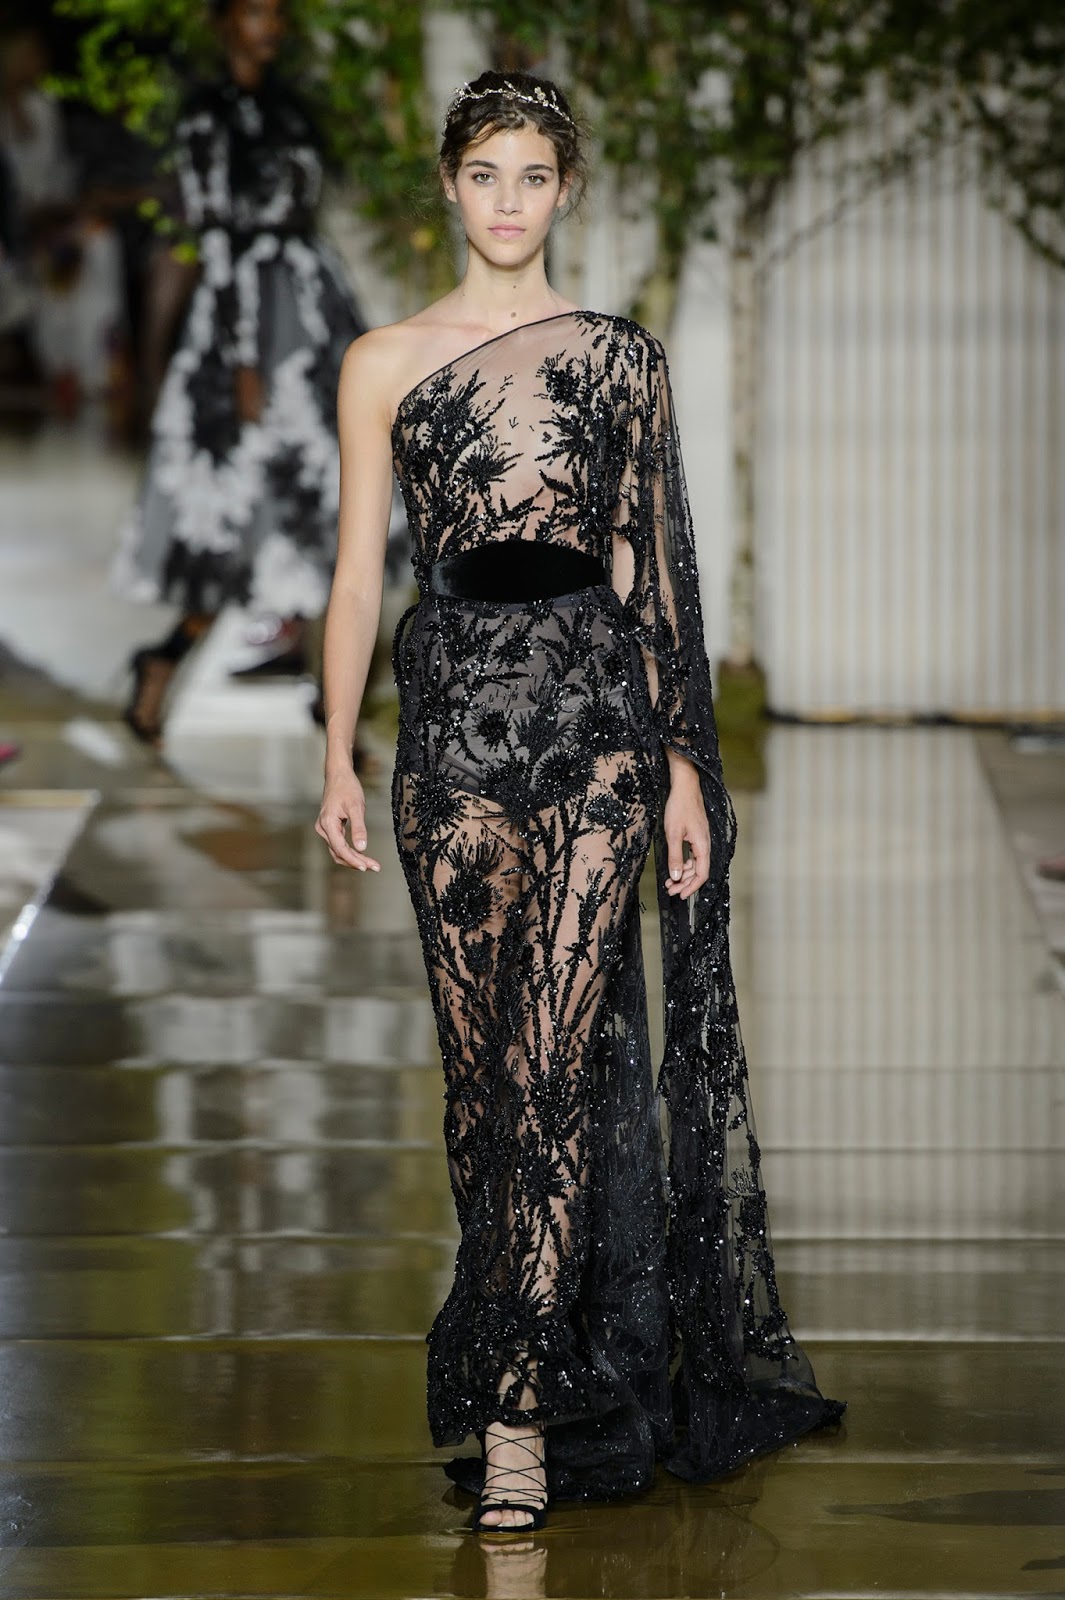 ZUHAIR MURAD GLAMOUR July 17, 2017 | ZsaZsa Bellagio - Like No Other